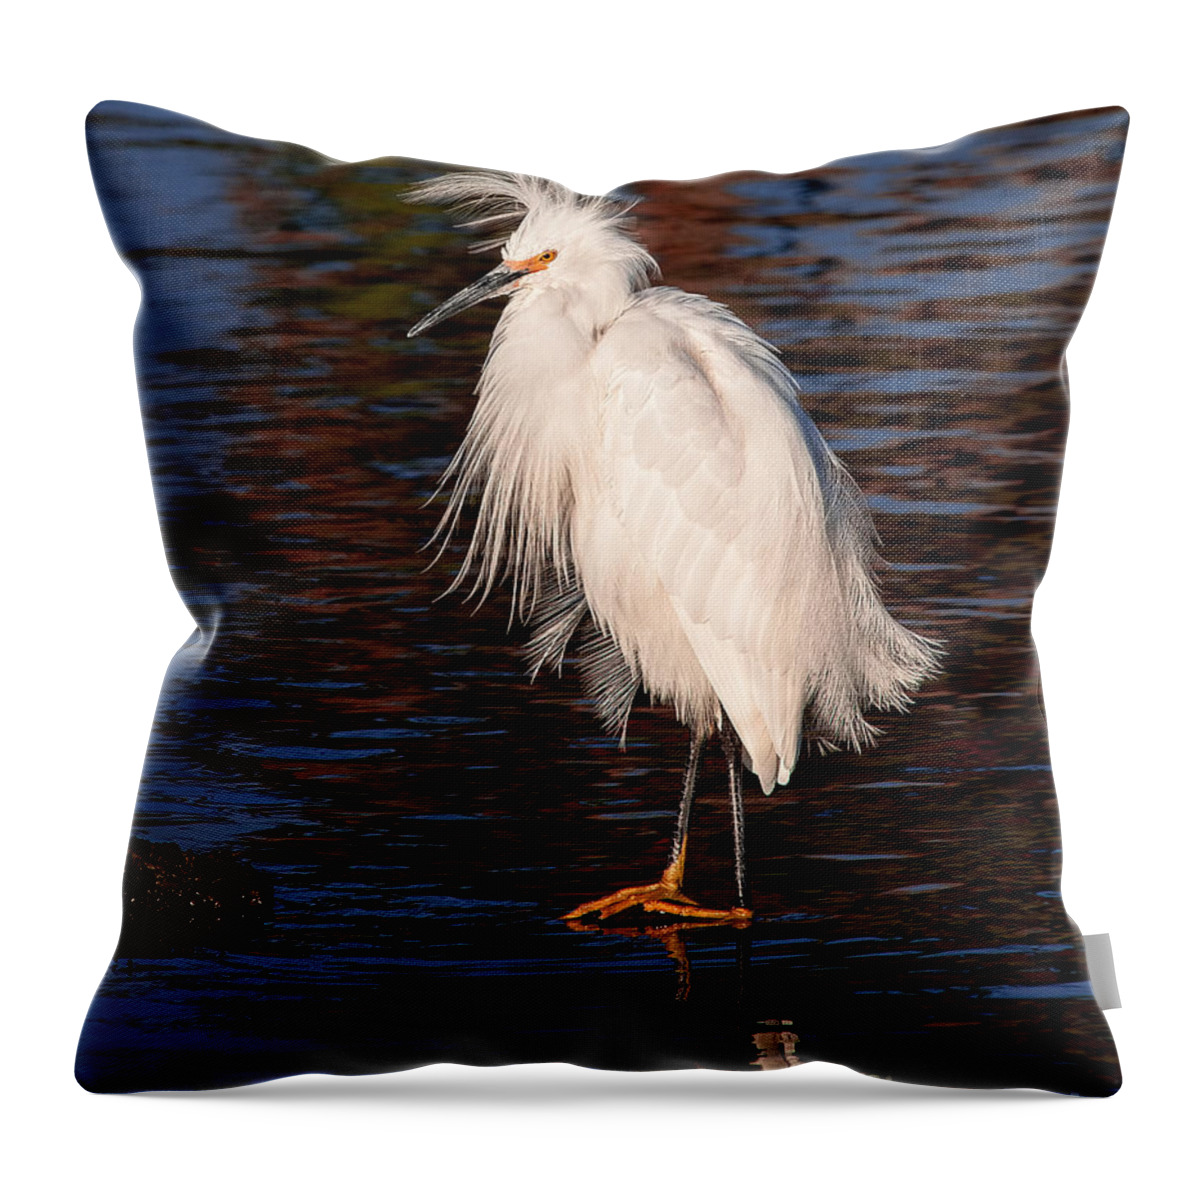 Great Egret Bird Photographs Throw Pillow featuring the photograph Great Egret Walking On Water by Jerry Cowart